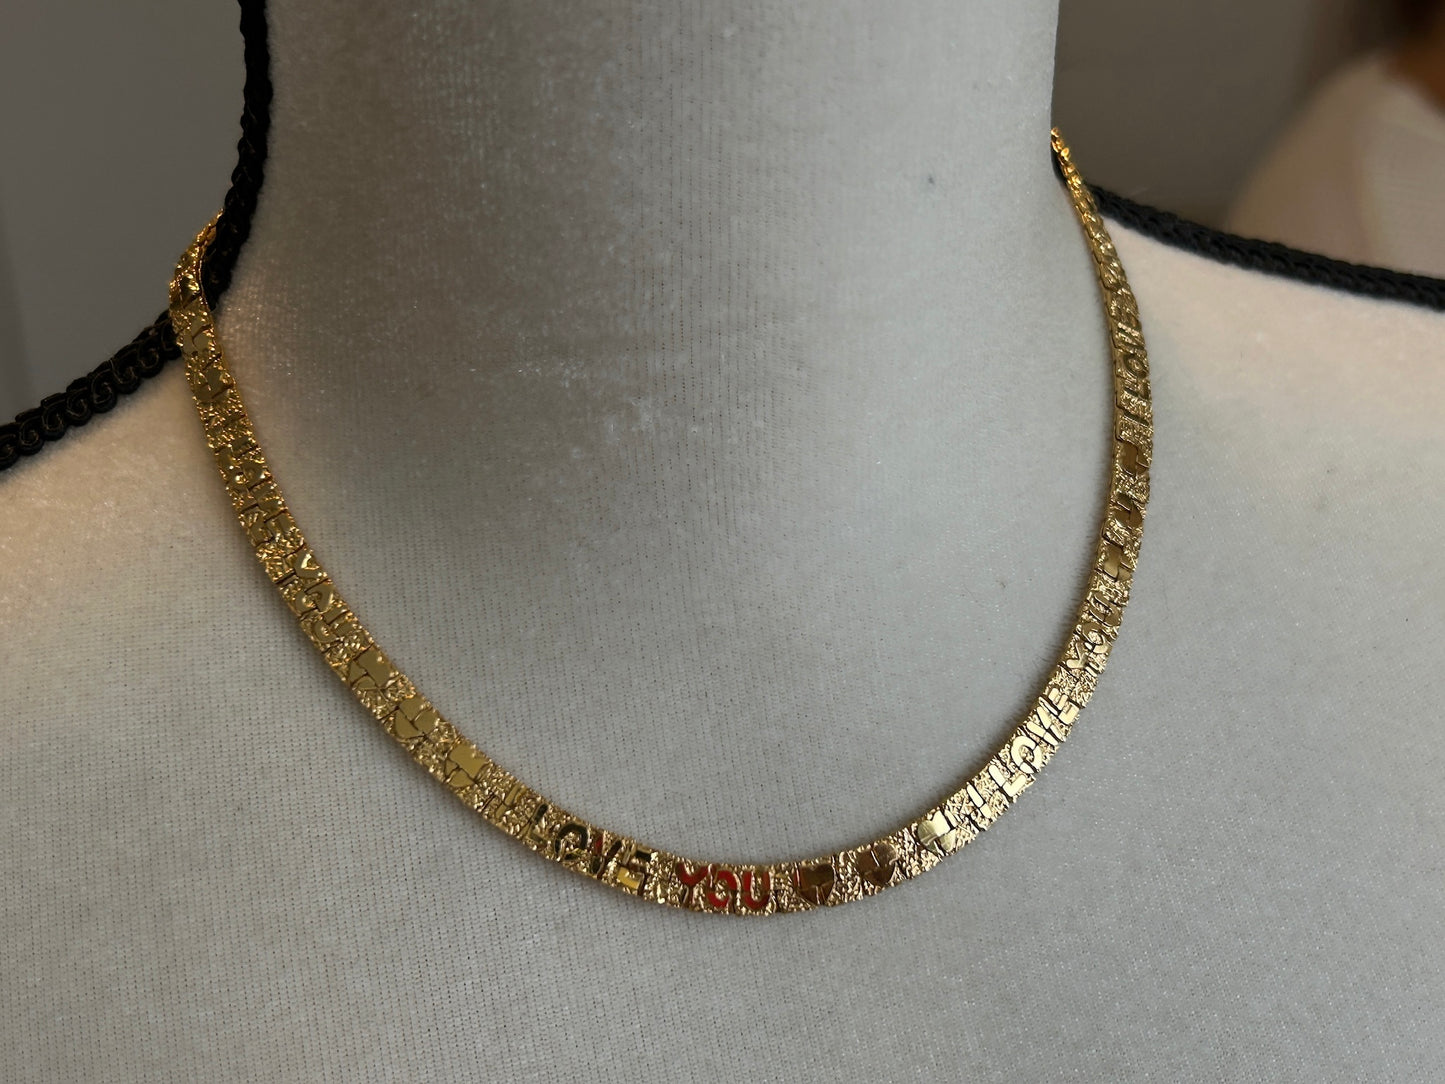 Vintage Gold Tone Wide Textured "I Love You" Collar Necklace